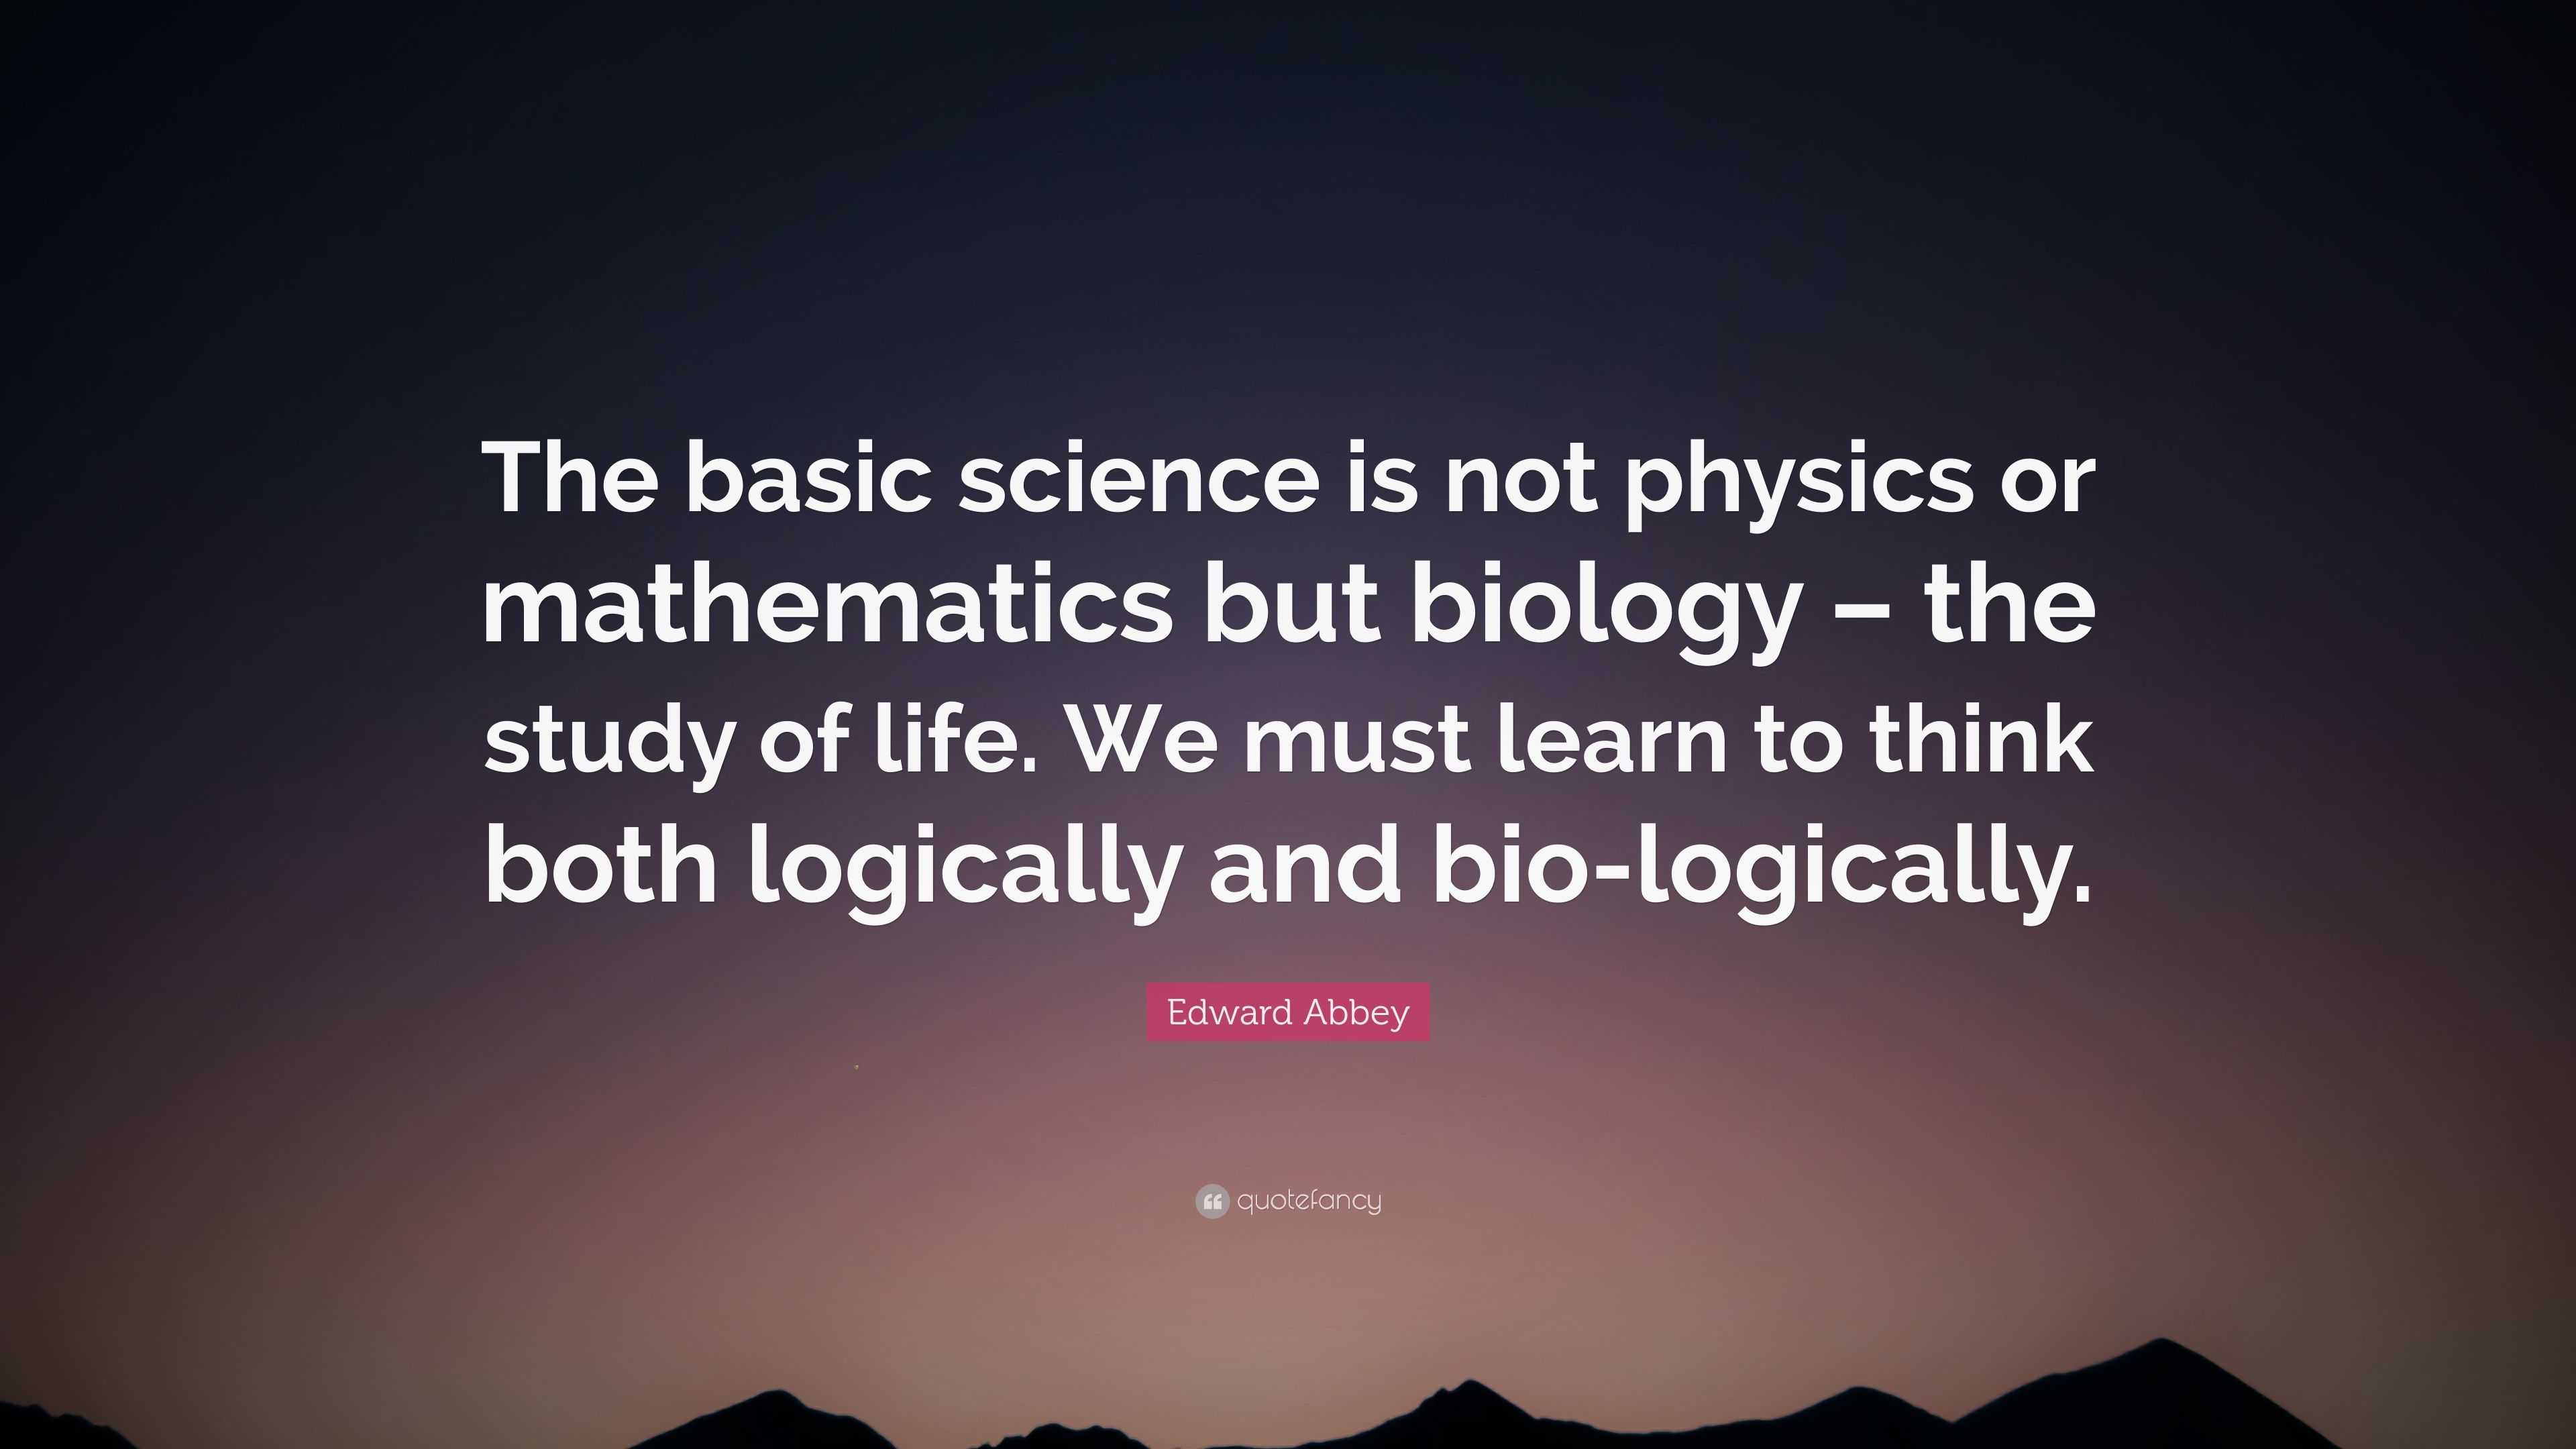 Edward Abbey Quote: "The basic science is not physics or mathematics but biology - the study of ...